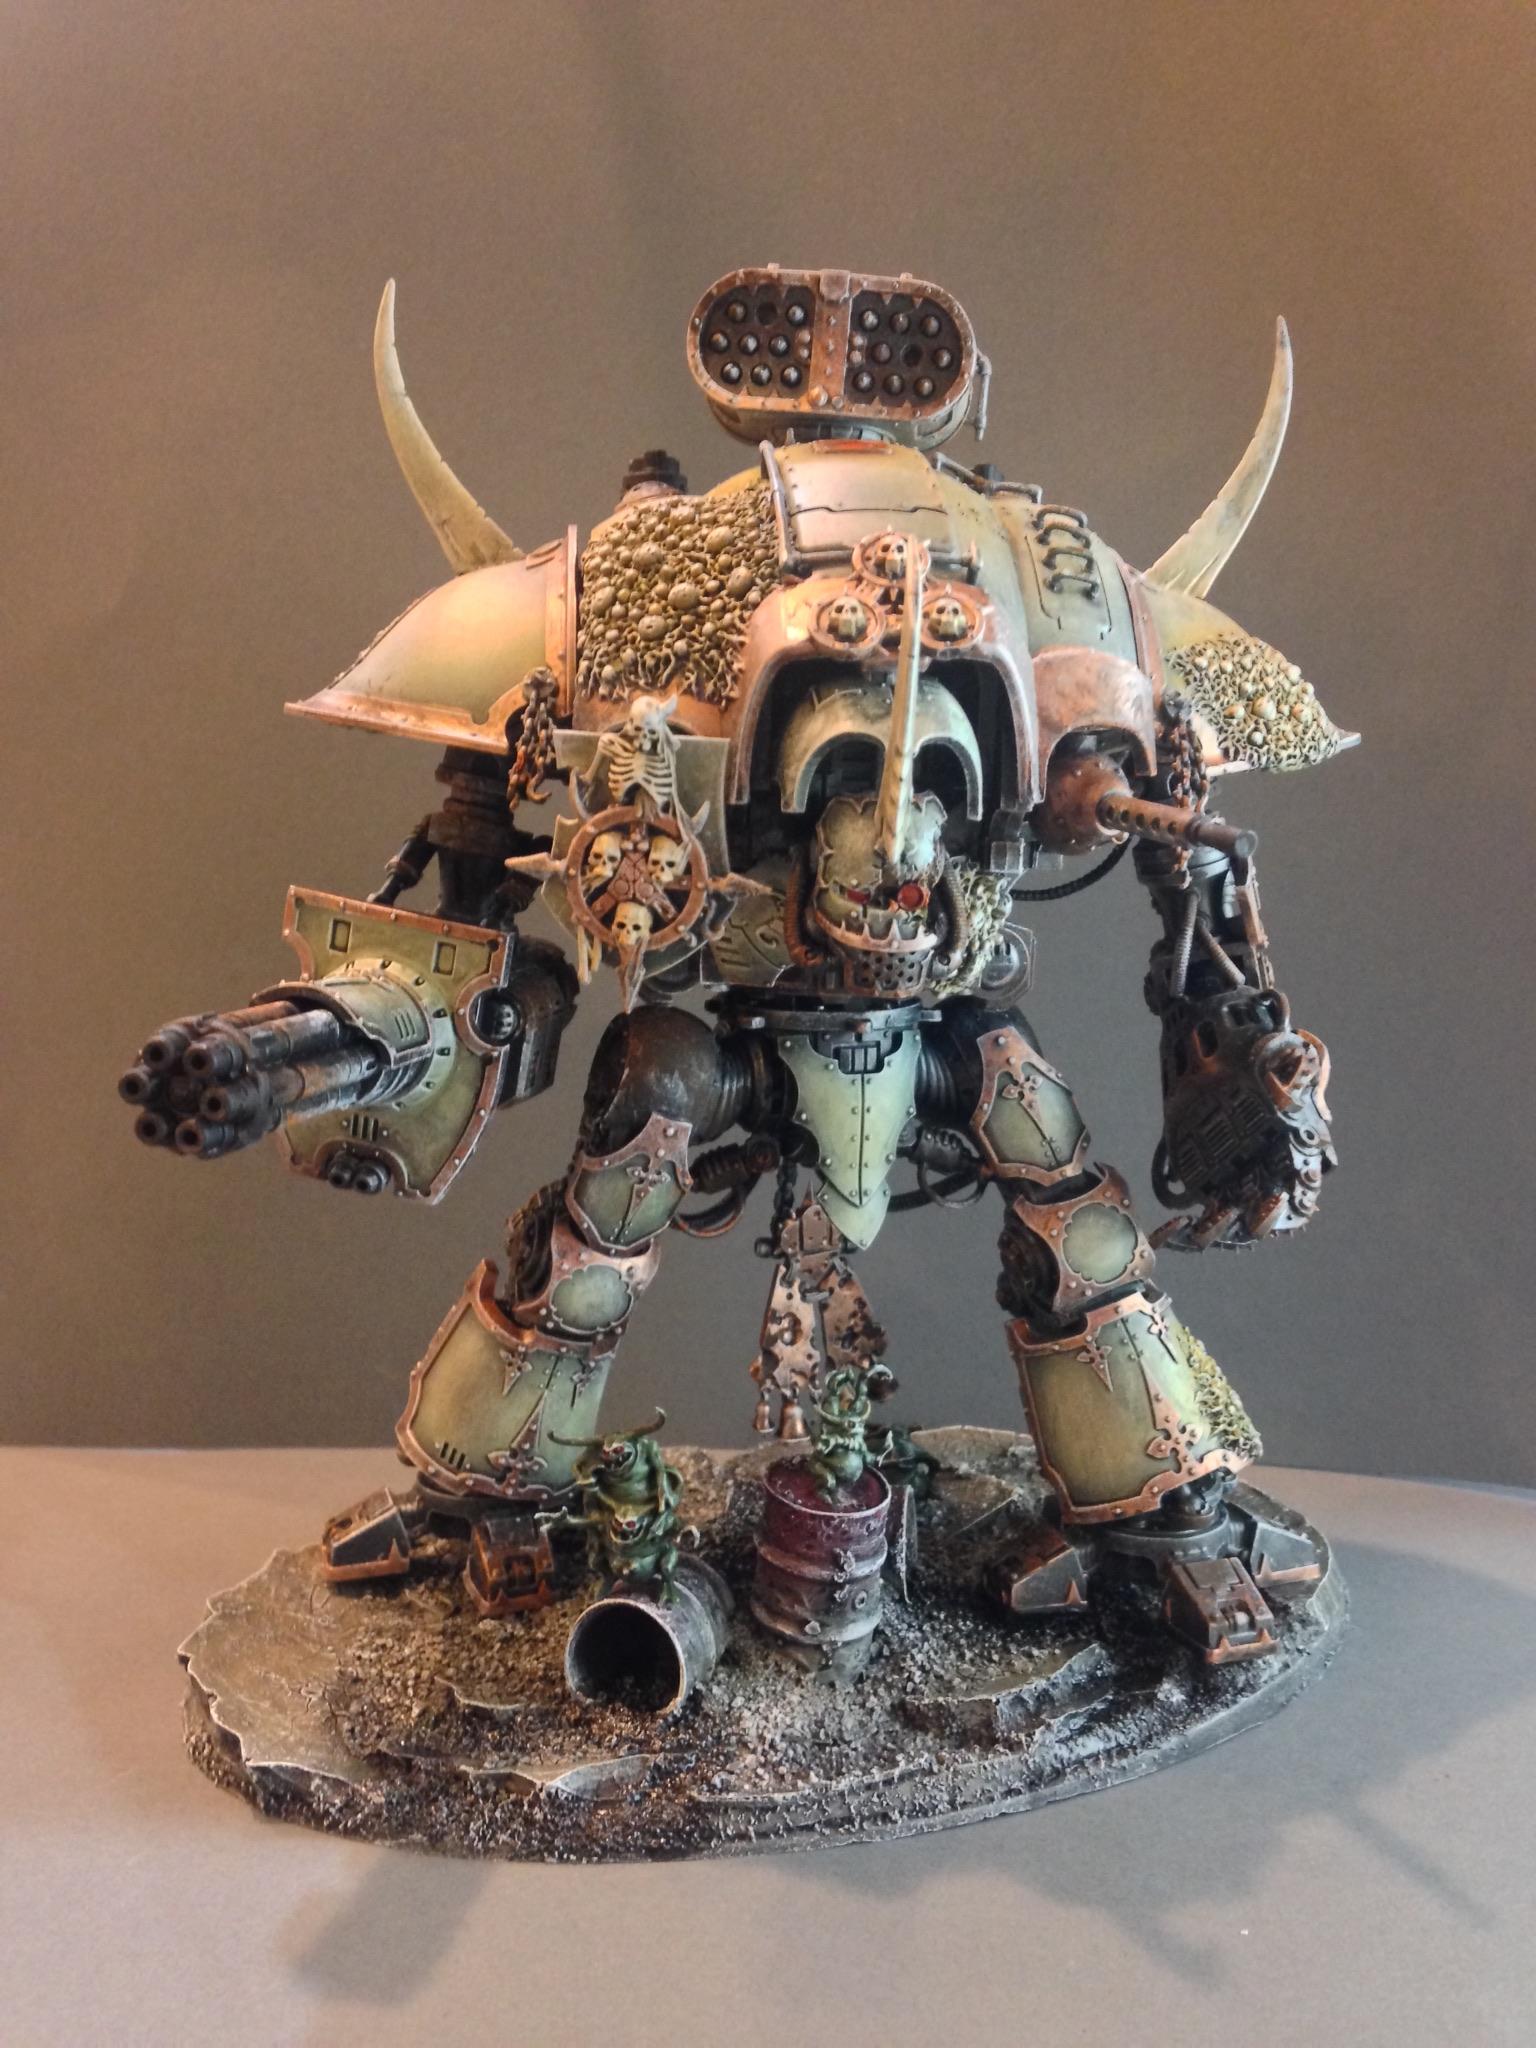 Renegade knight, all weapons are magnetized